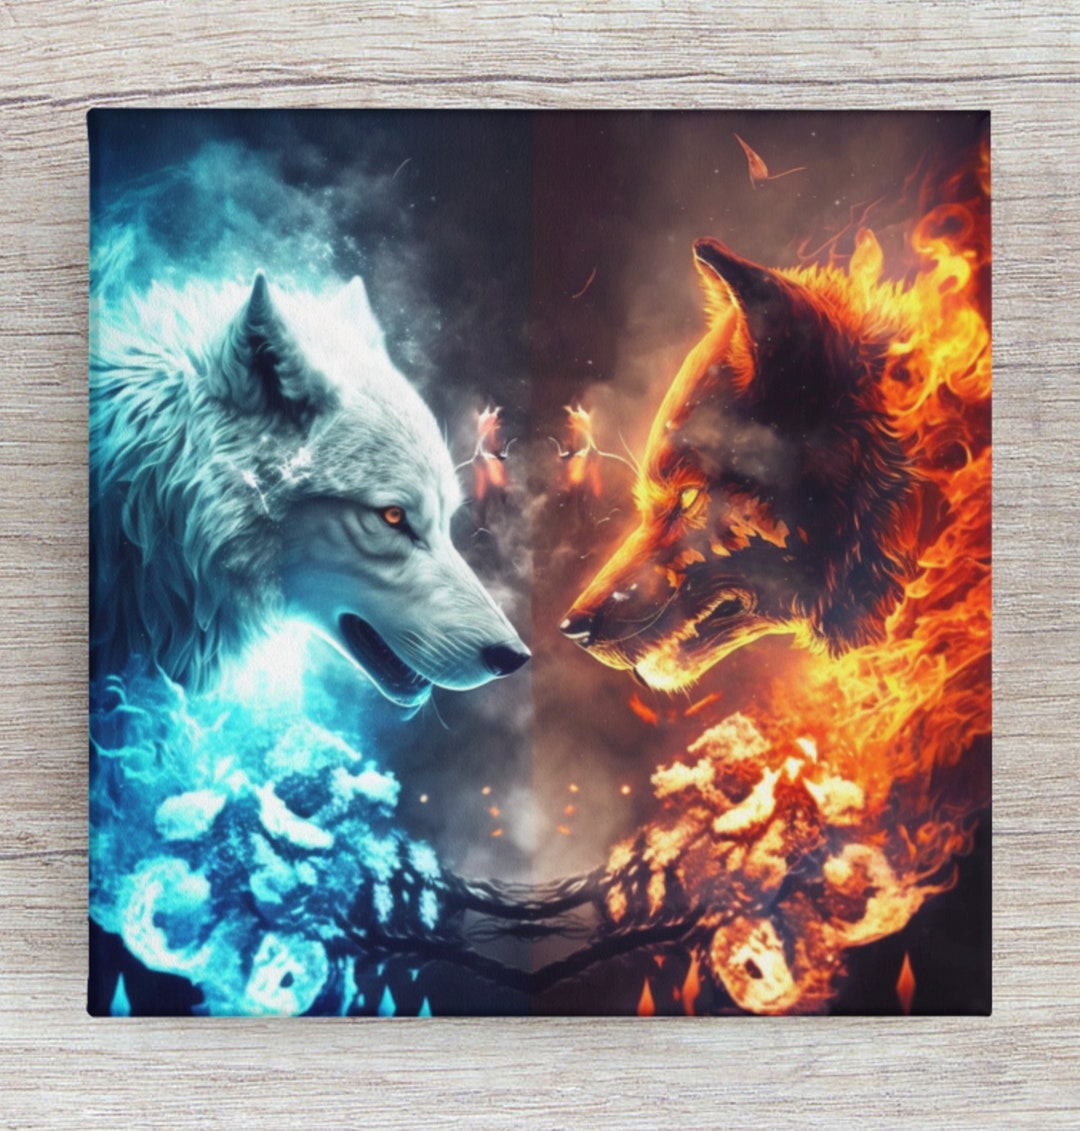 100+] Fire And Ice Wolf Wallpapers